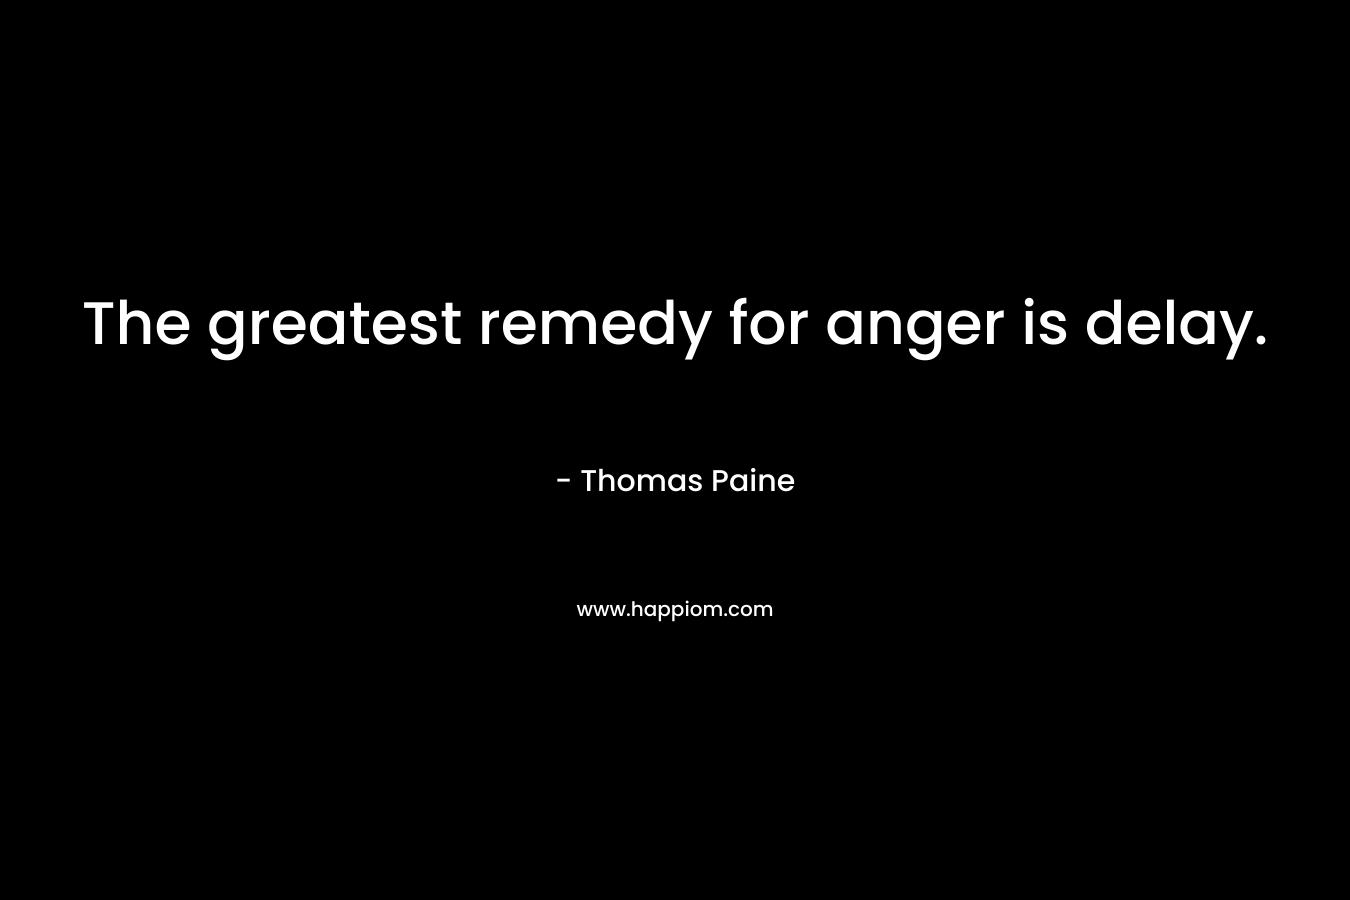 The greatest remedy for anger is delay. – Thomas Paine